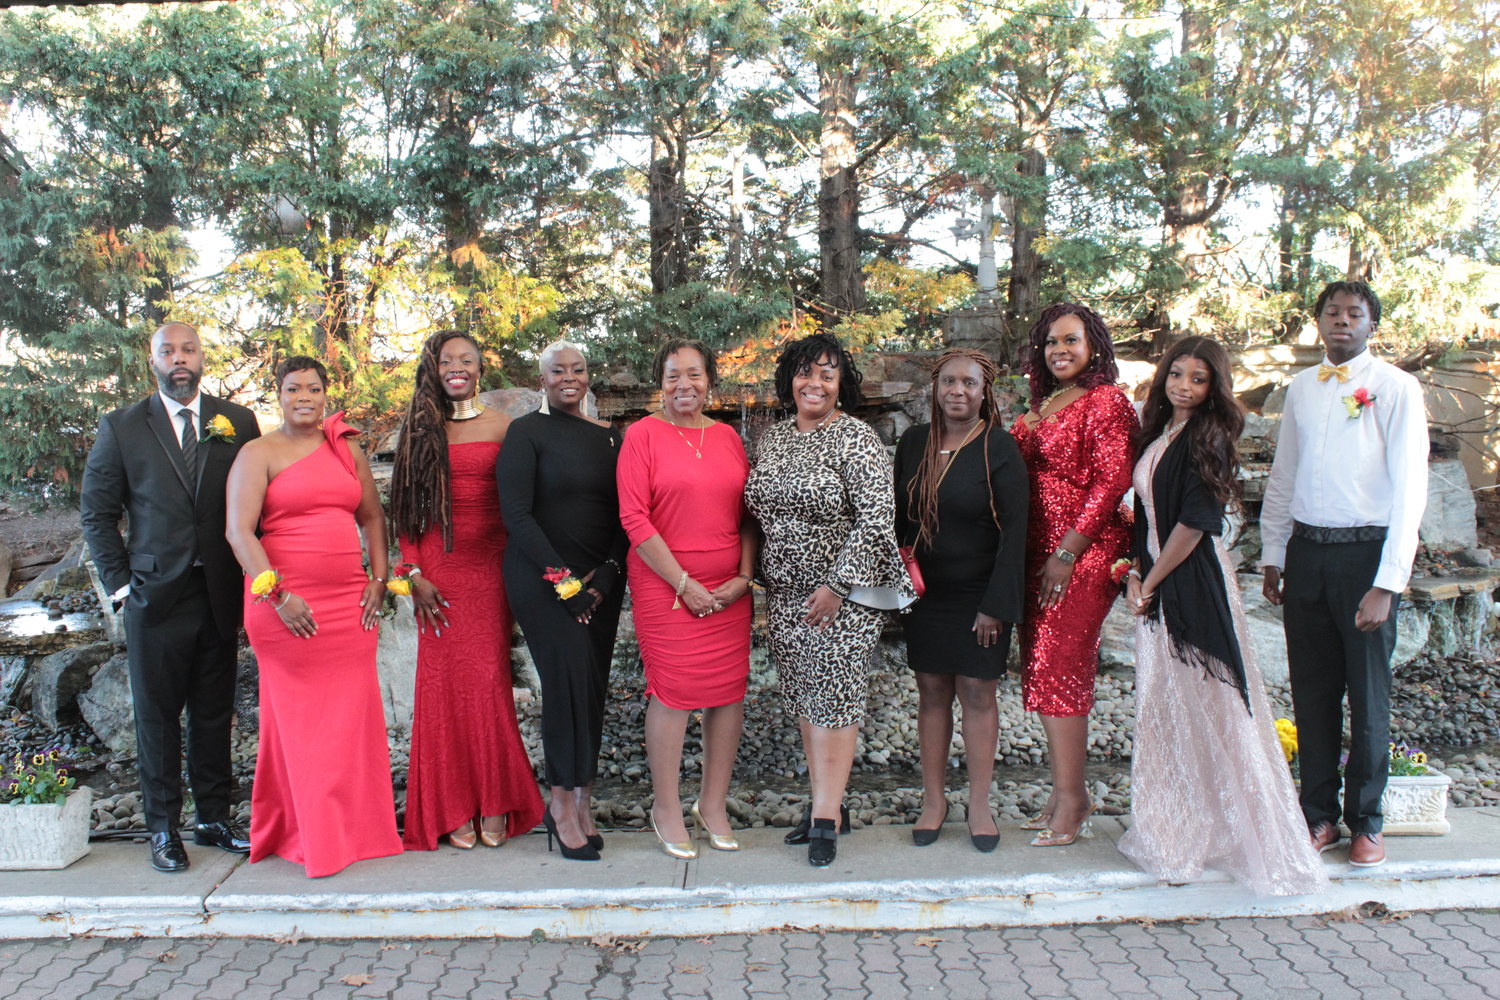 The Red and Gold Scholarship Gala, hosted by the Beta Omicron chapter of the National Sorority of Phi Delta Kappa, celebrated the organization’s 21st anniversary, recognized community leaders, and gave scholarships to students from across Long Island and Queens.